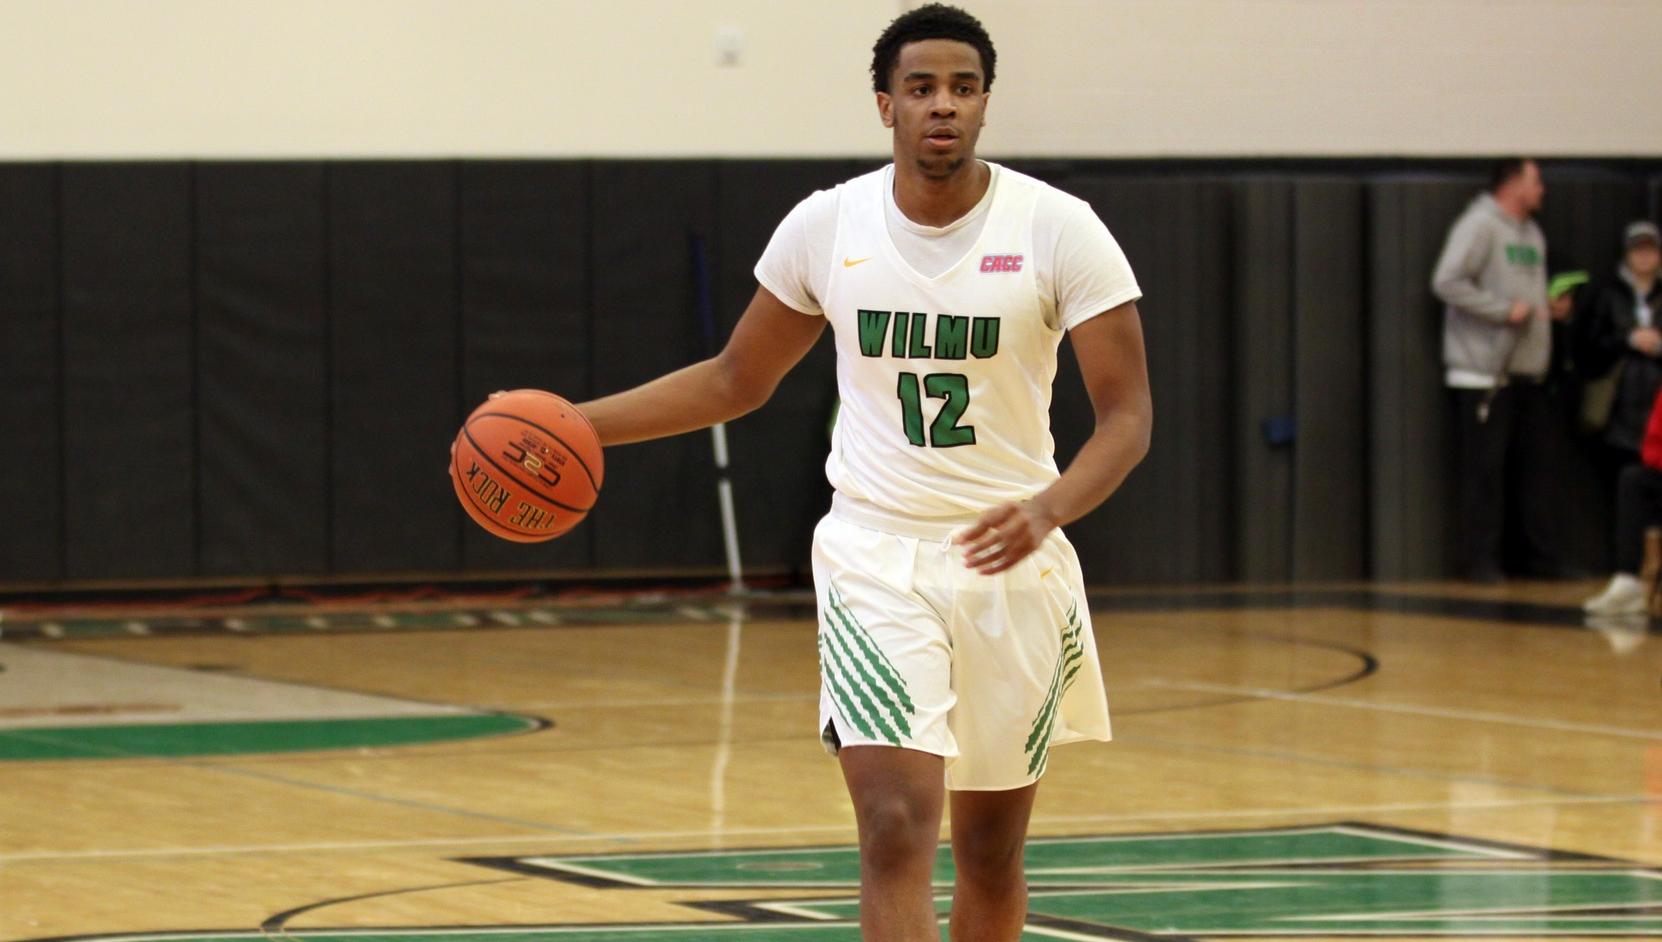 Copyright 2019; Wilmington University. All rights reserved. File photo of Jordan Harding who secured a double-double at Chestnut Hill. Photo by Katlynne Tubo. February 2, 2019 vs. Caldwell.